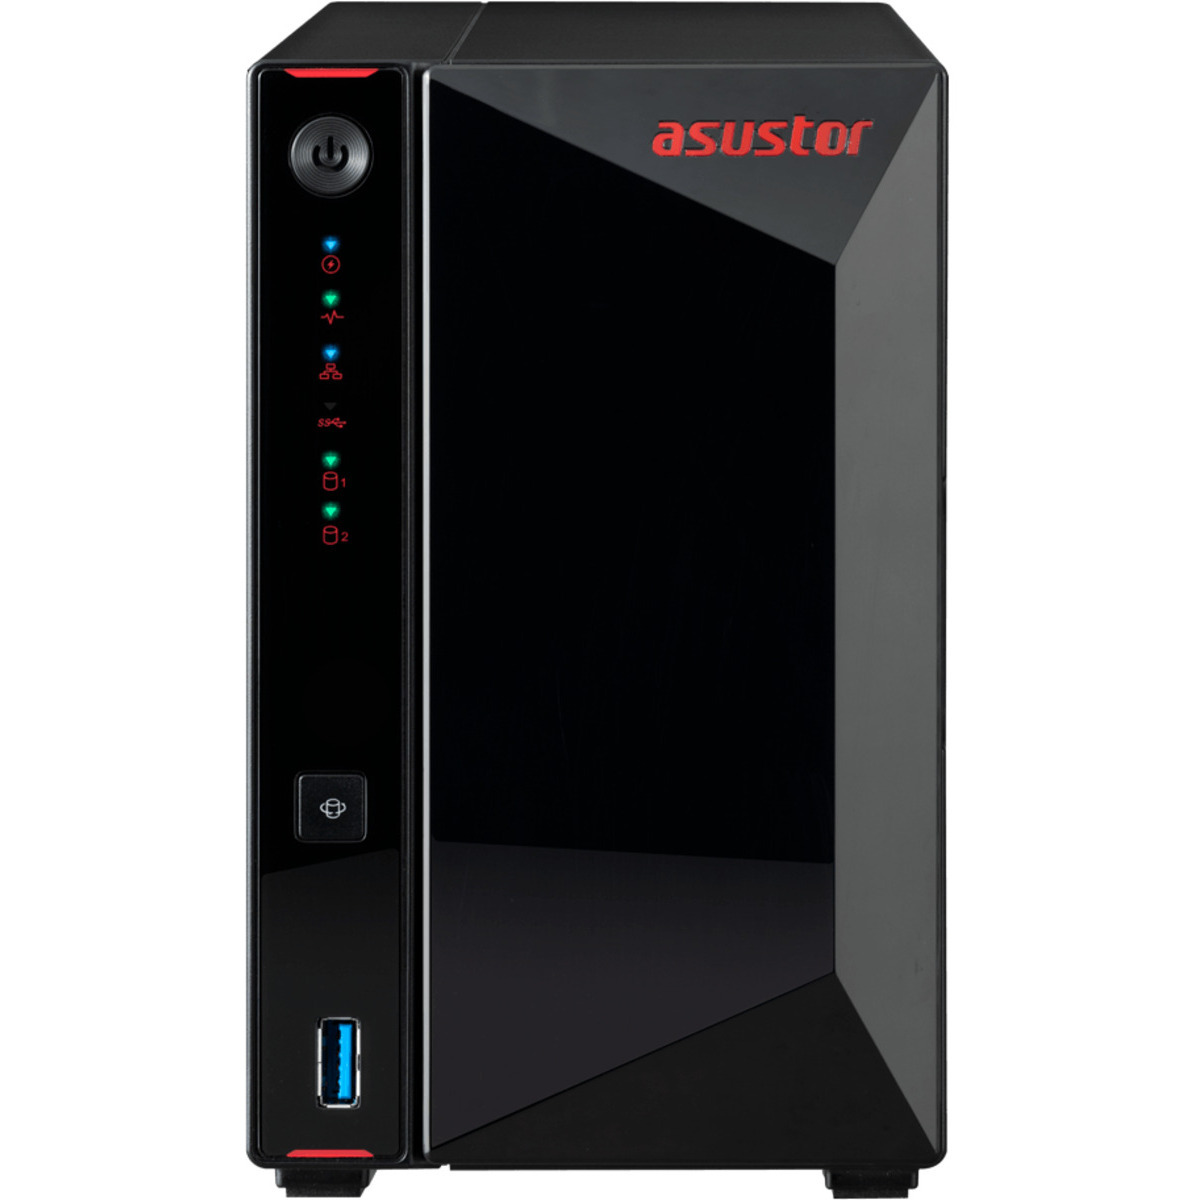 buy ASUSTOR AS5202T Nimbustor Desktop NAS - Network Attached Storage Device Burn-In Tested Configurations - FREE RAM UPGRADE - nas headquarters buy network attached storage server device das new raid-5 free shipping usa AS5202T Nimbustor